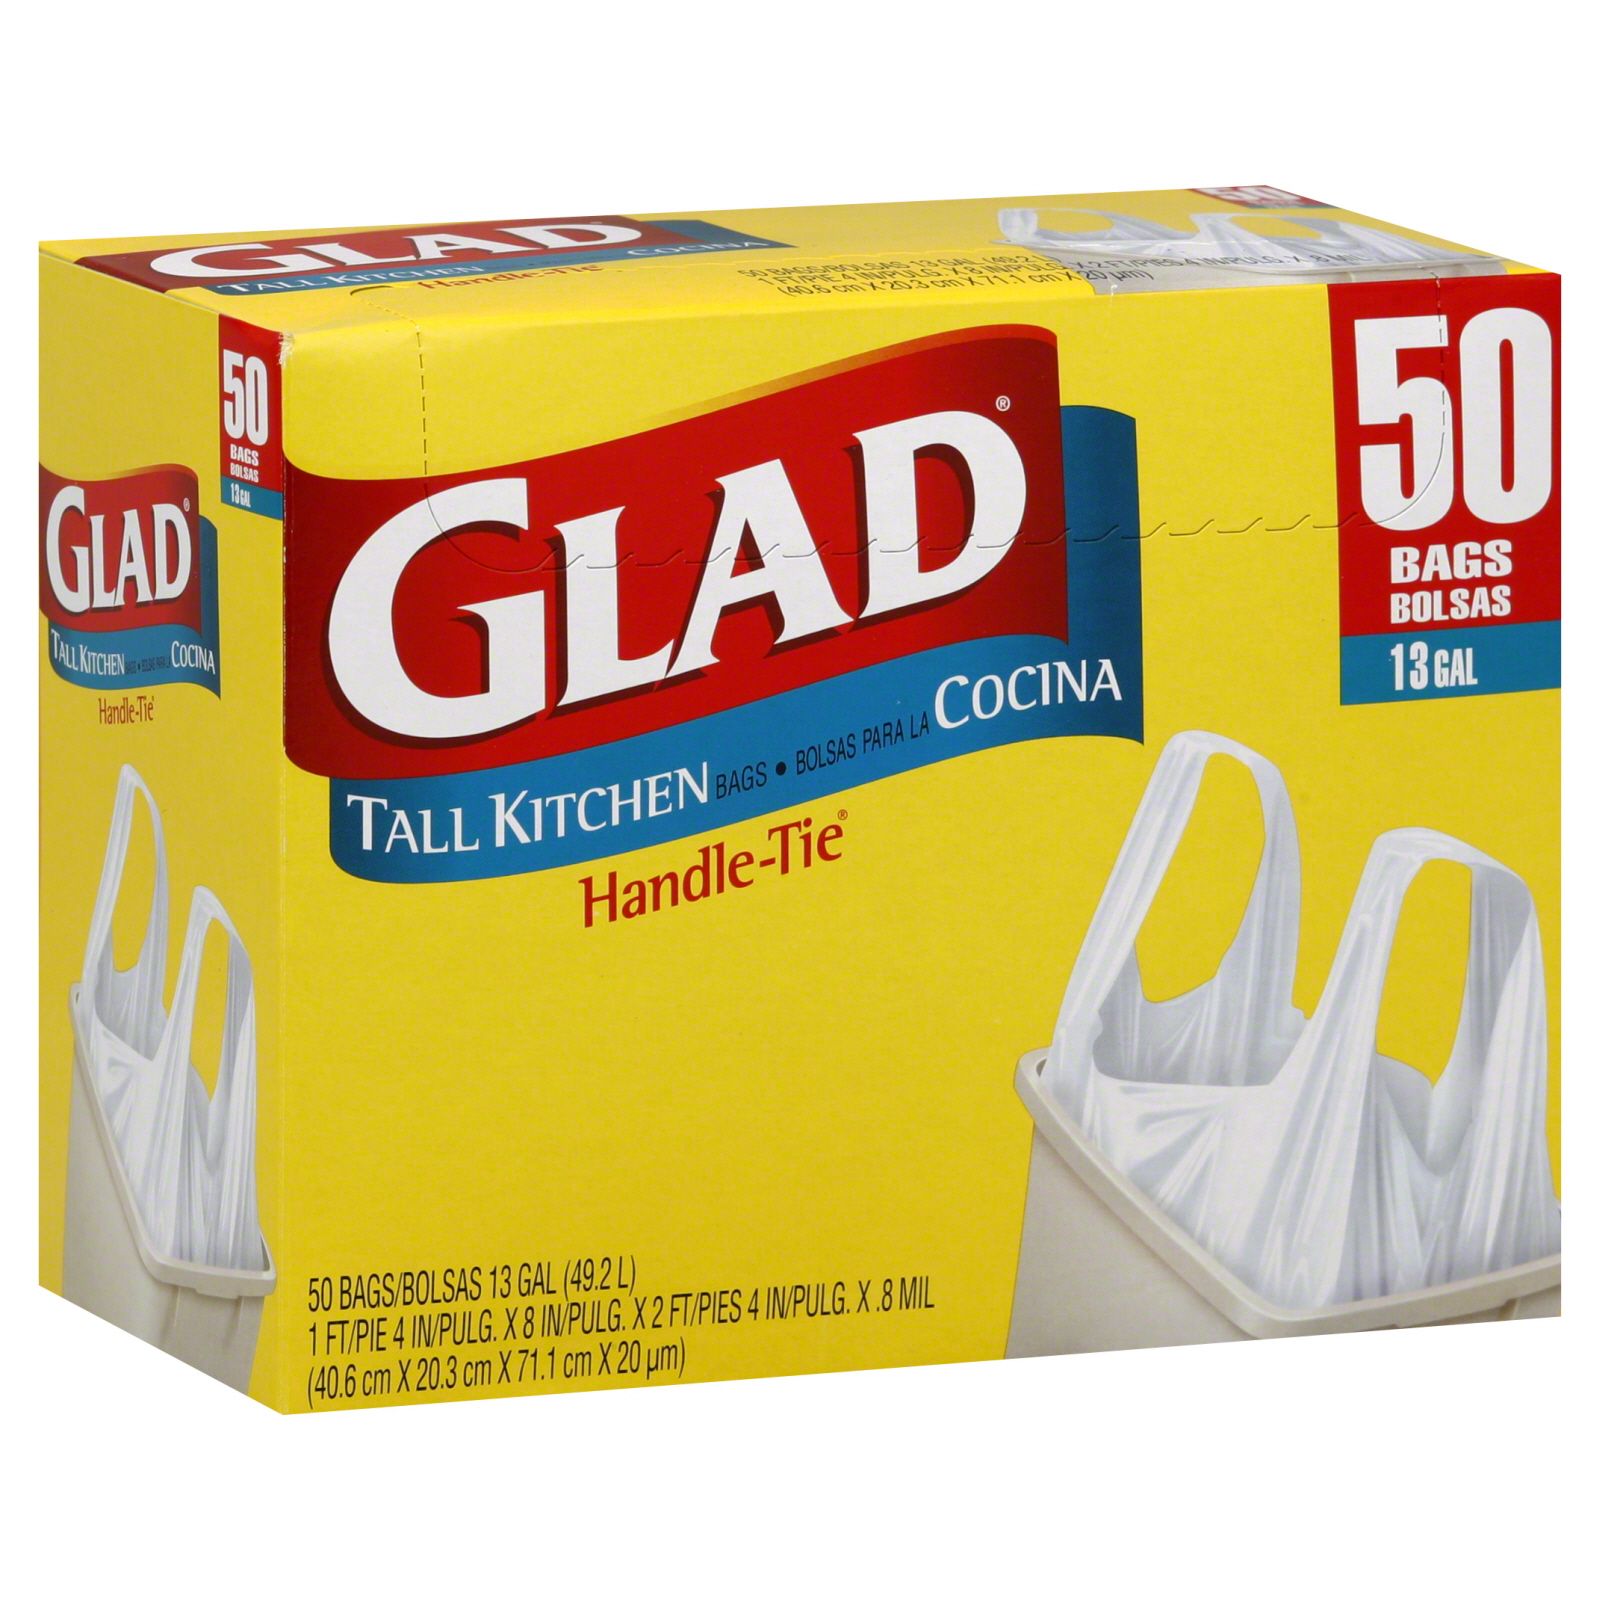 Glad Handle-Tie Tall Kitchen Bags, 13 Gallon, 50 bags